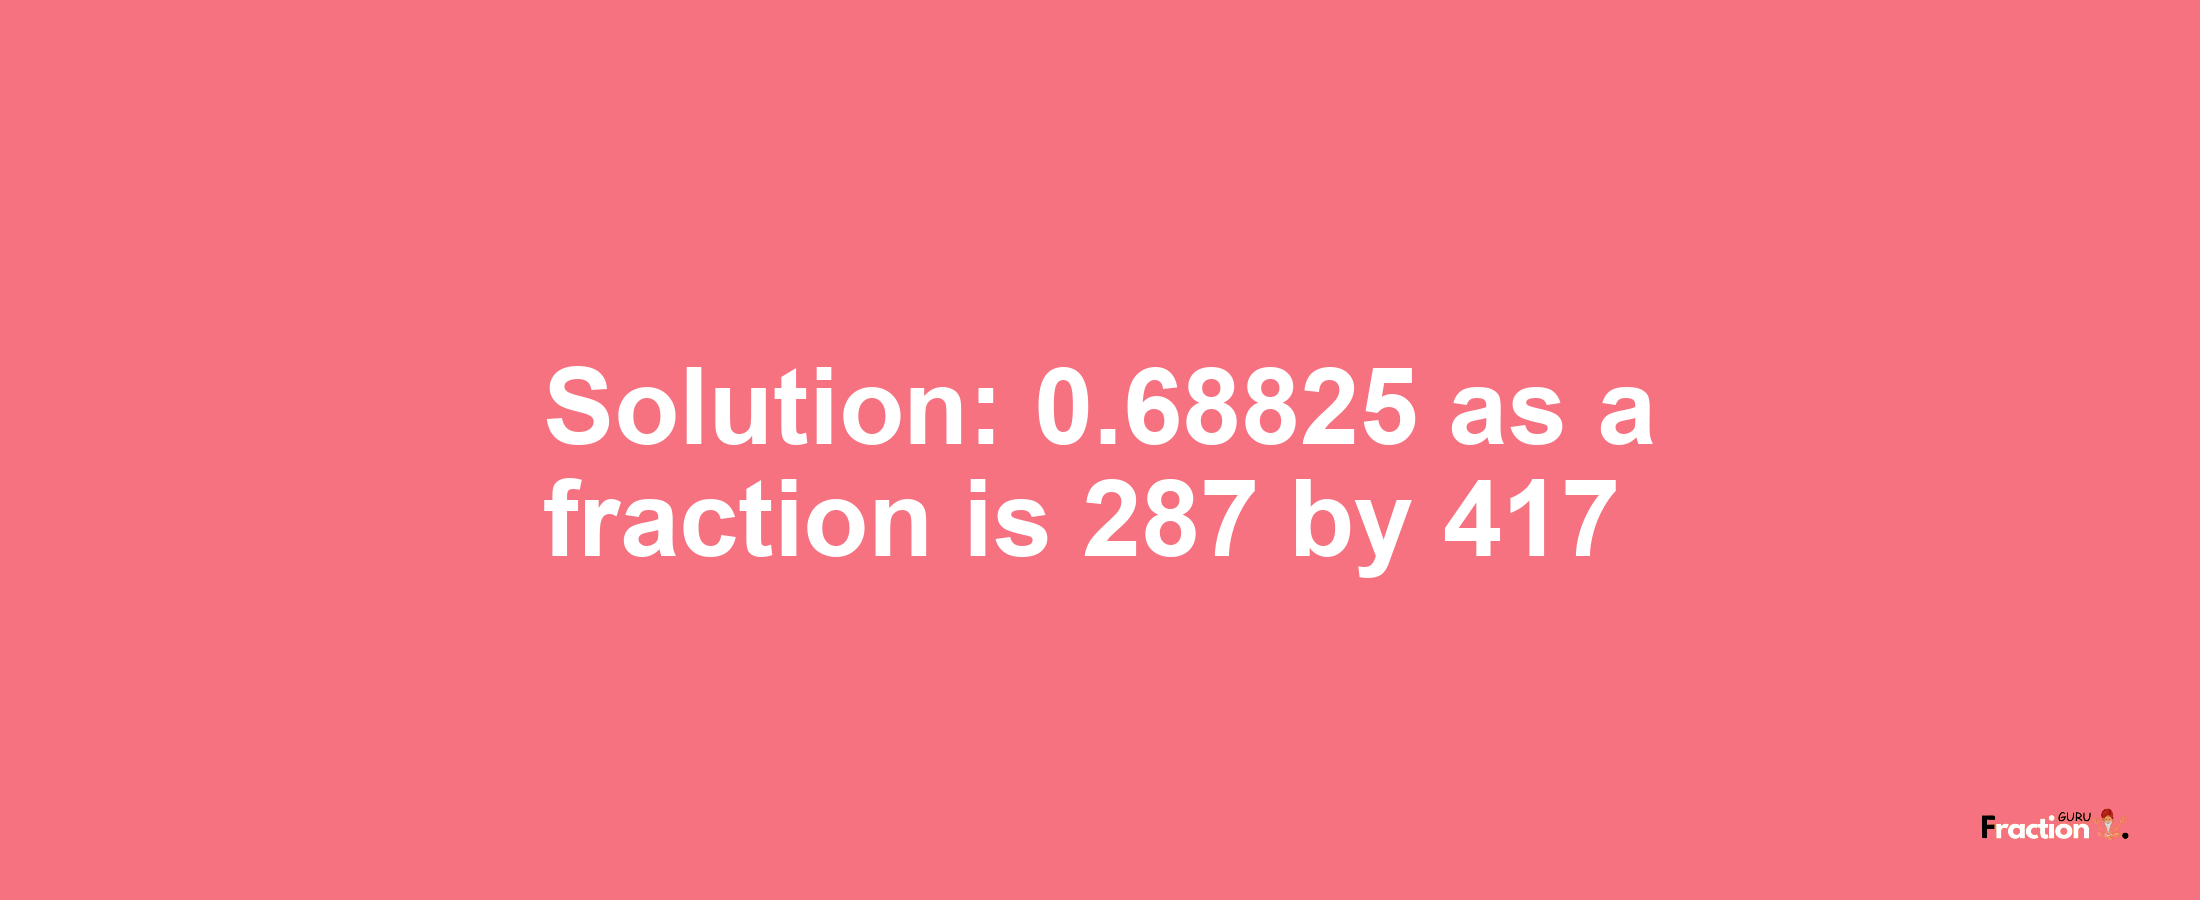 Solution:0.68825 as a fraction is 287/417